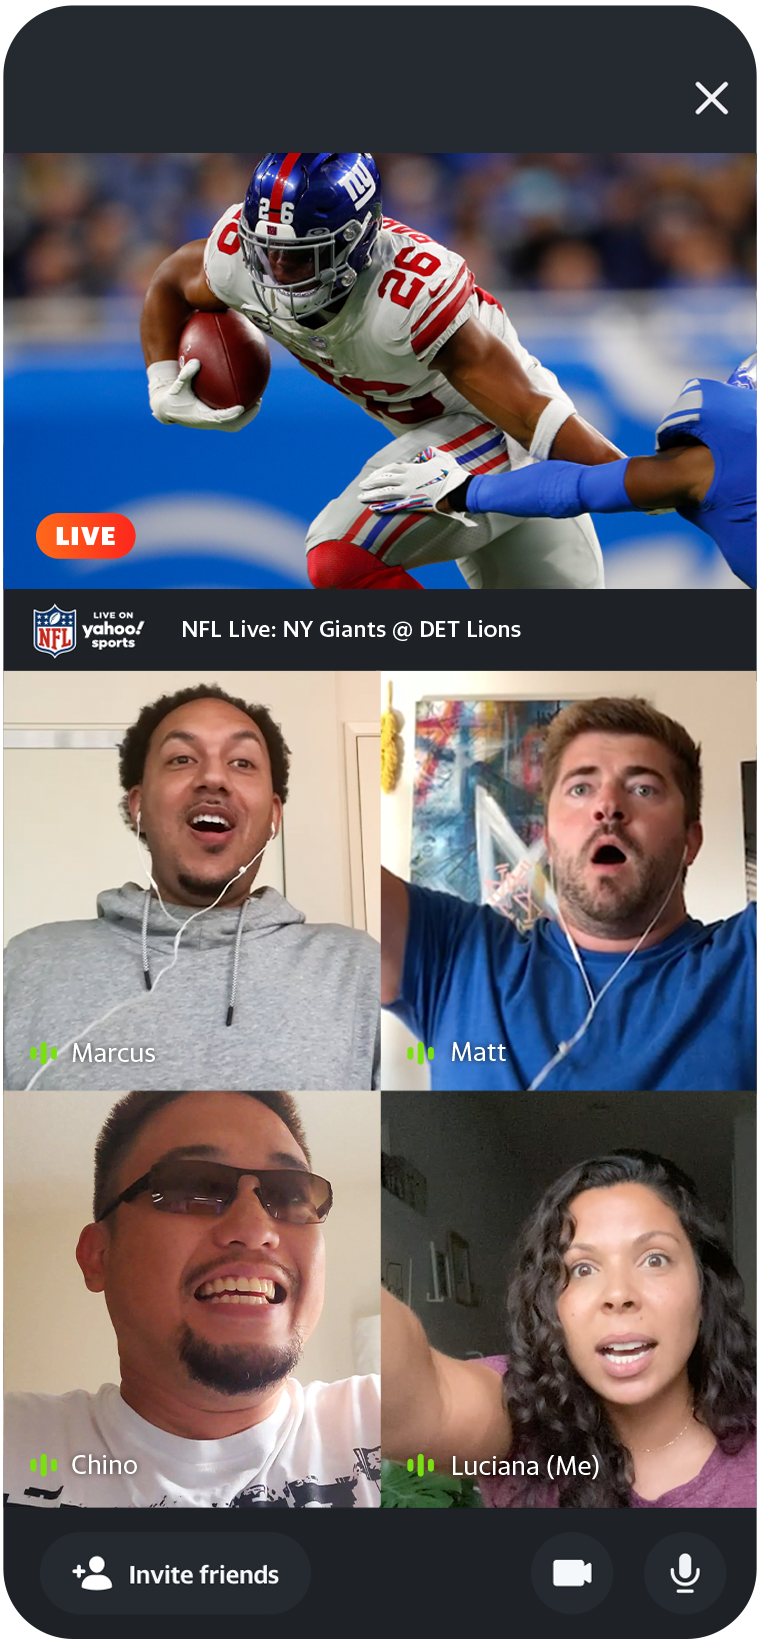 NFL Kickoff 2020 Yahoo Sports Watch Together Syncs Four Video Calls in Live-Game-Streaming Experience